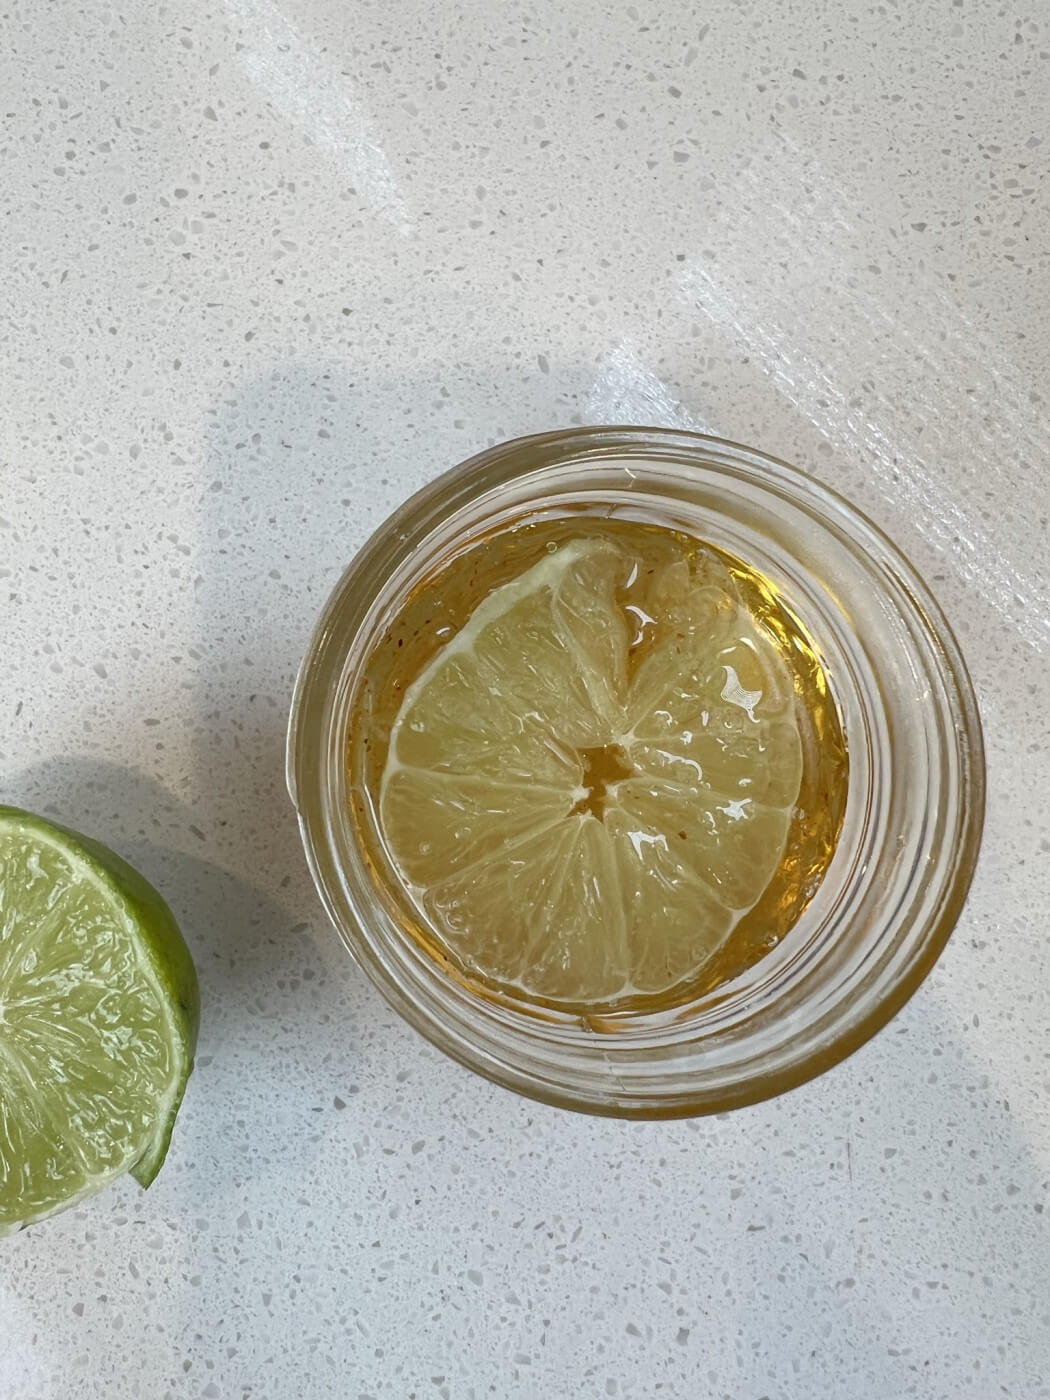 Summer Cocktails: Pineapple Simple Syrup